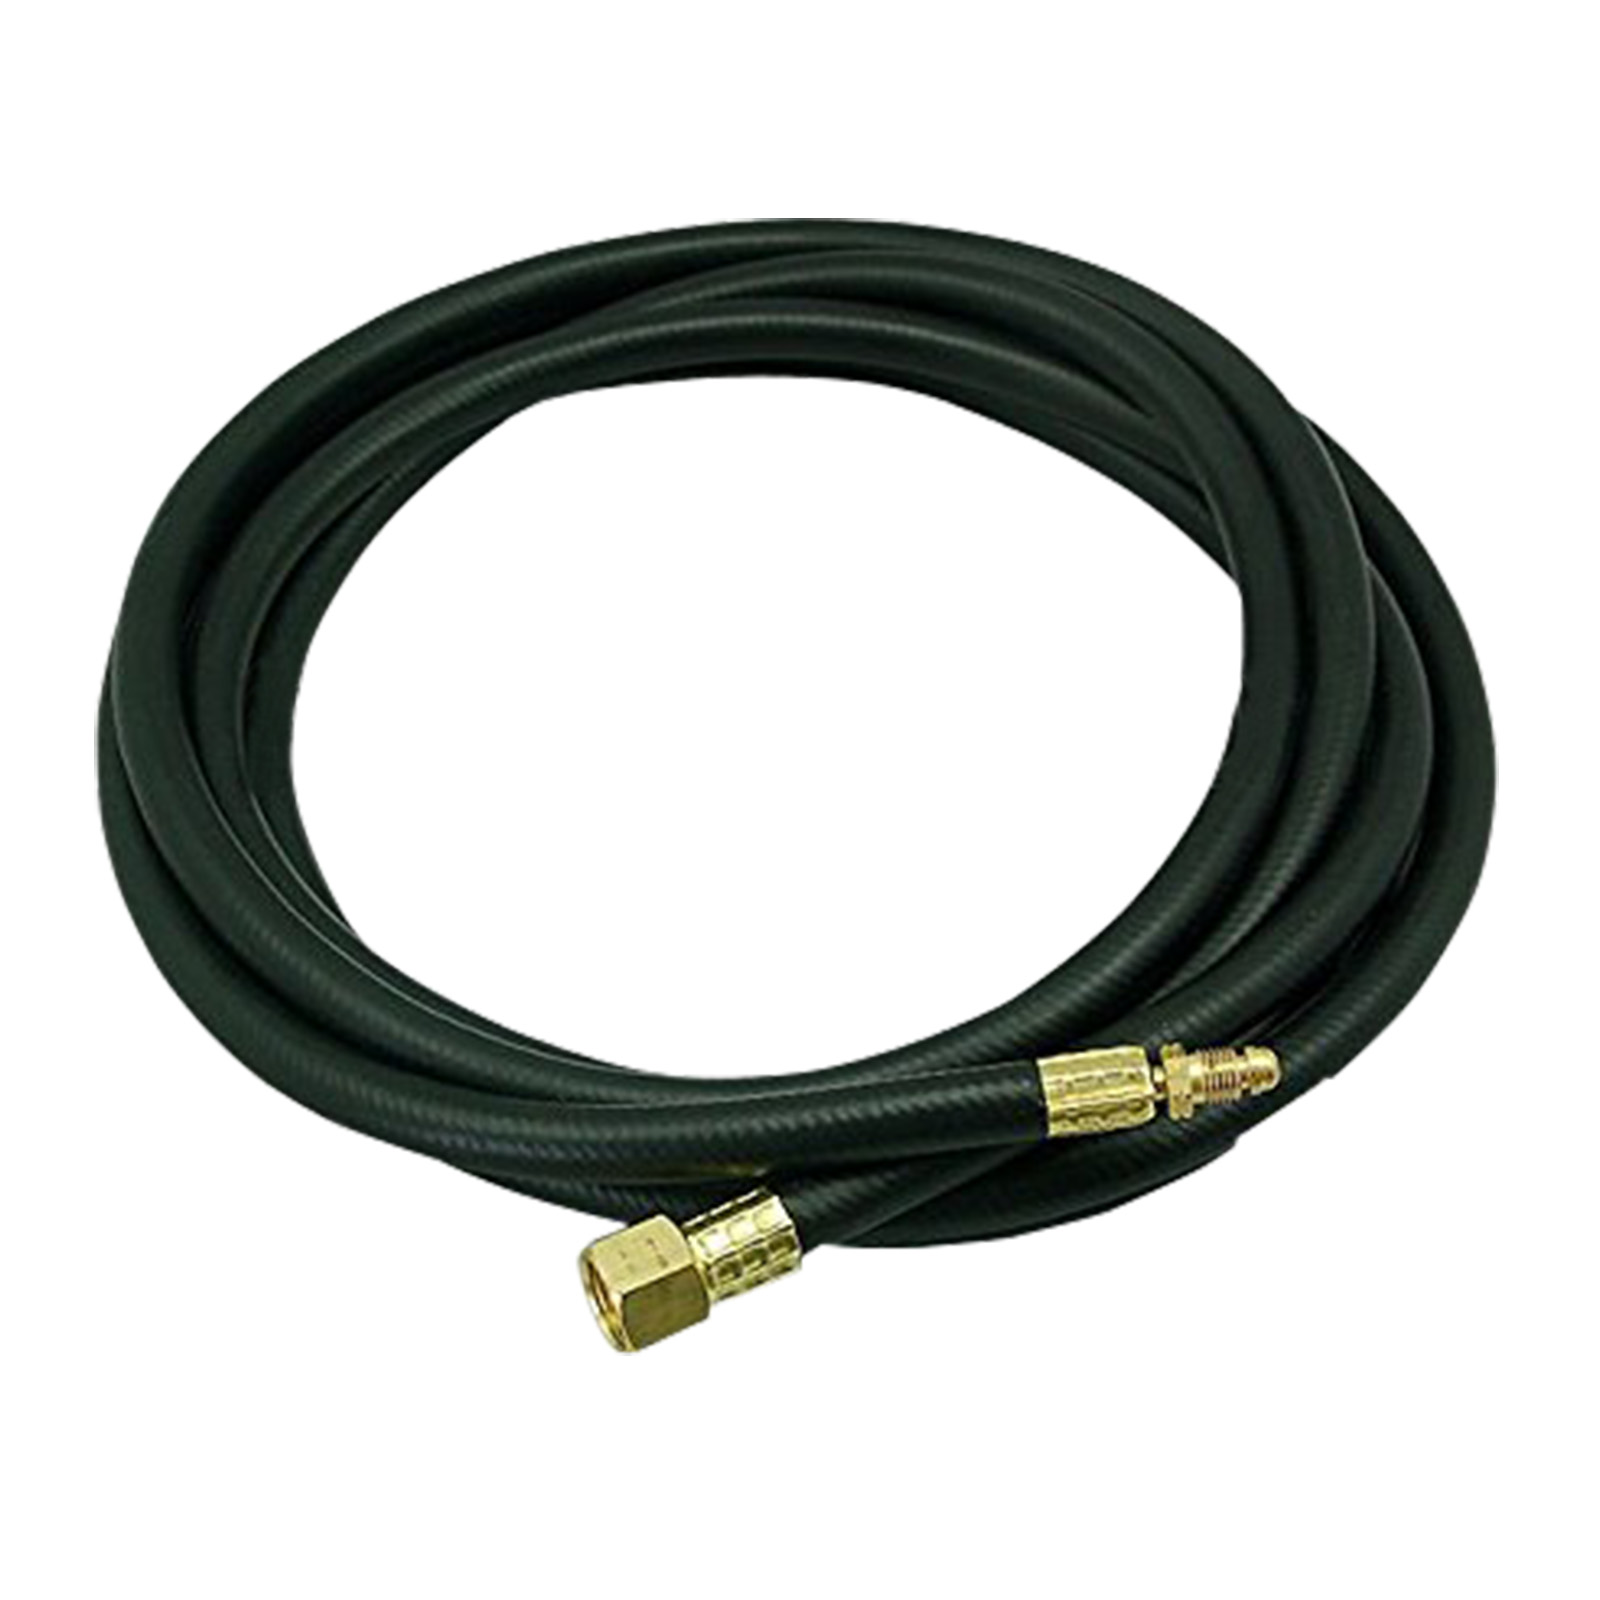 Power Cable Hose for WP-20 TIG Welding Torch 12" Feet Connector: 7/8-14LH 1/4-28 Wire 6mm2 (WP-20 12")